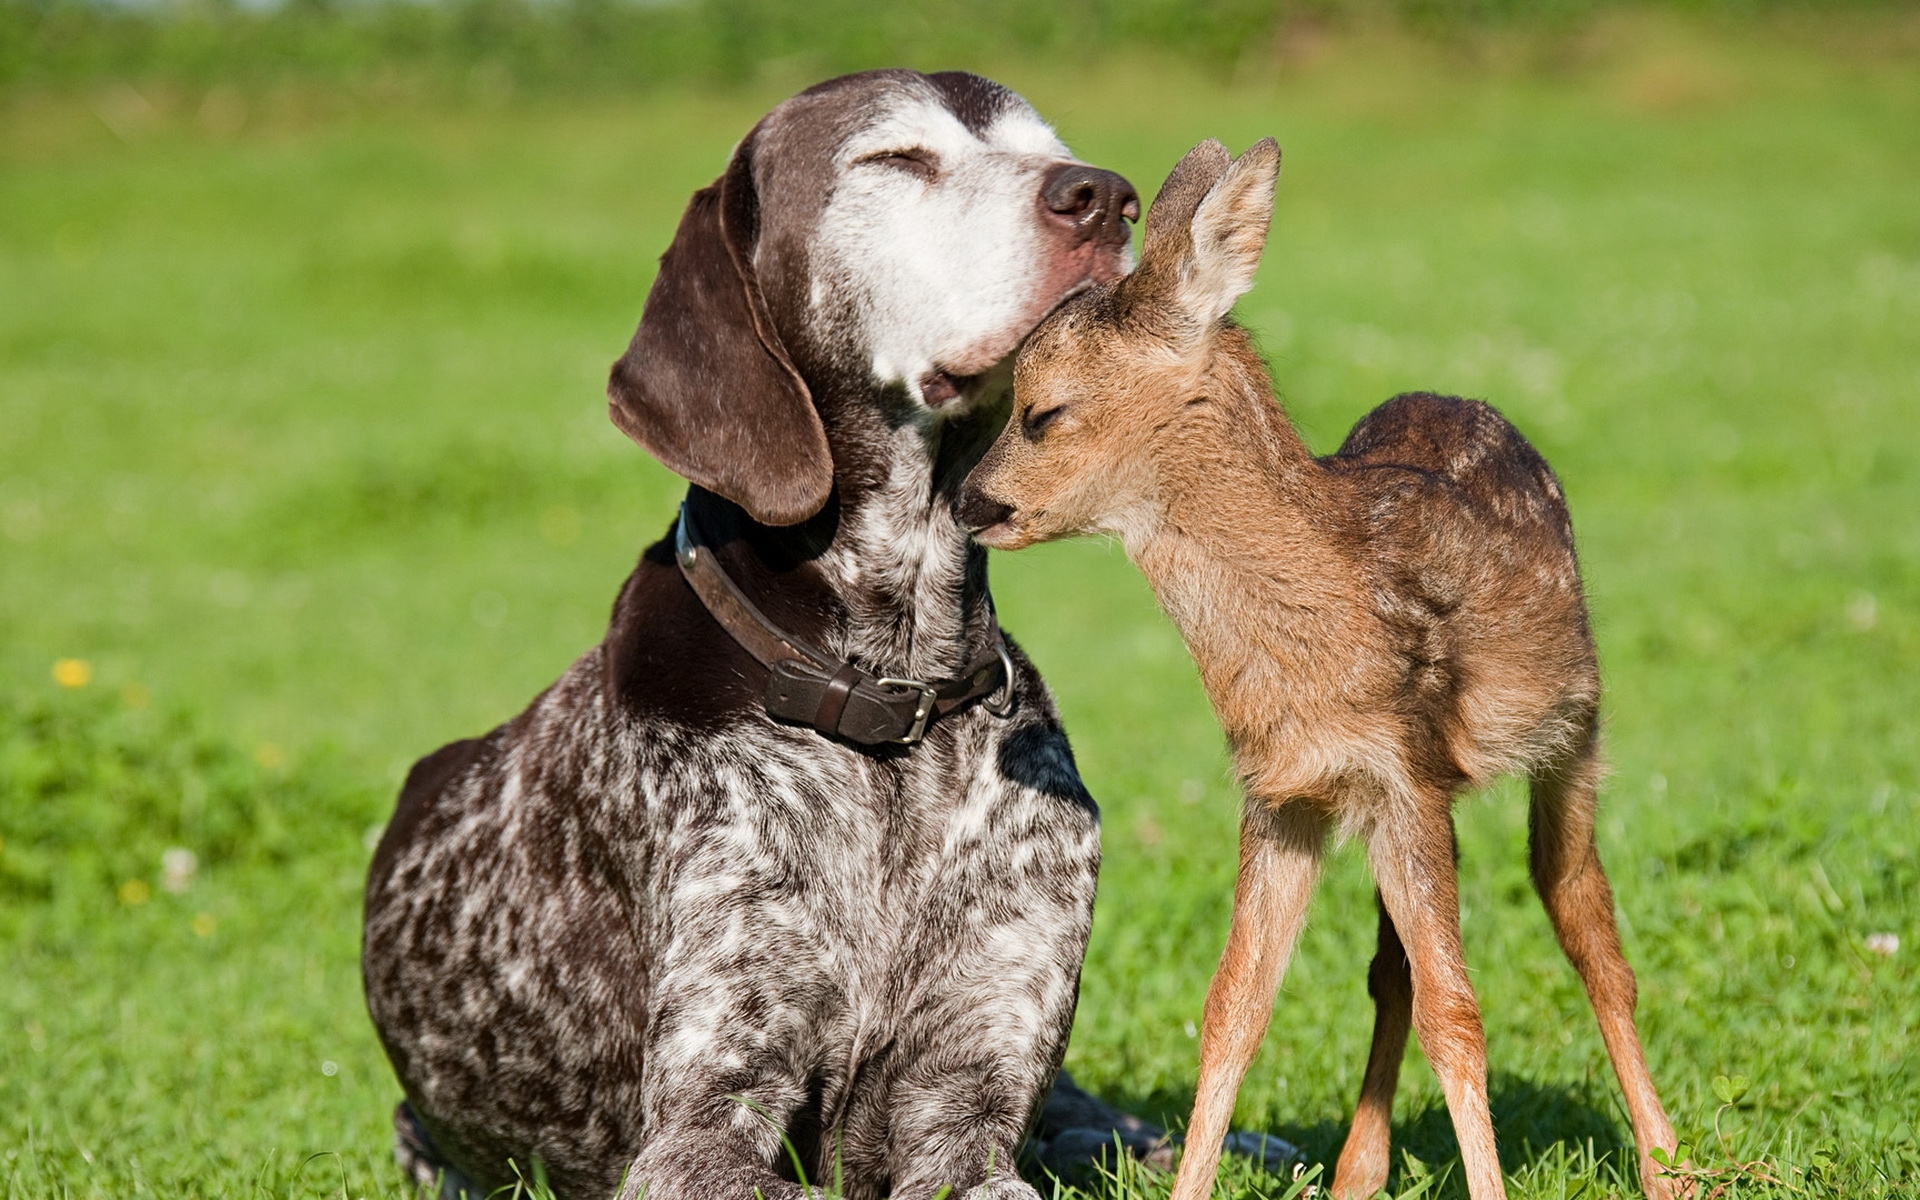 Dog and deer wallpapers and images   wallpapers pictures photos